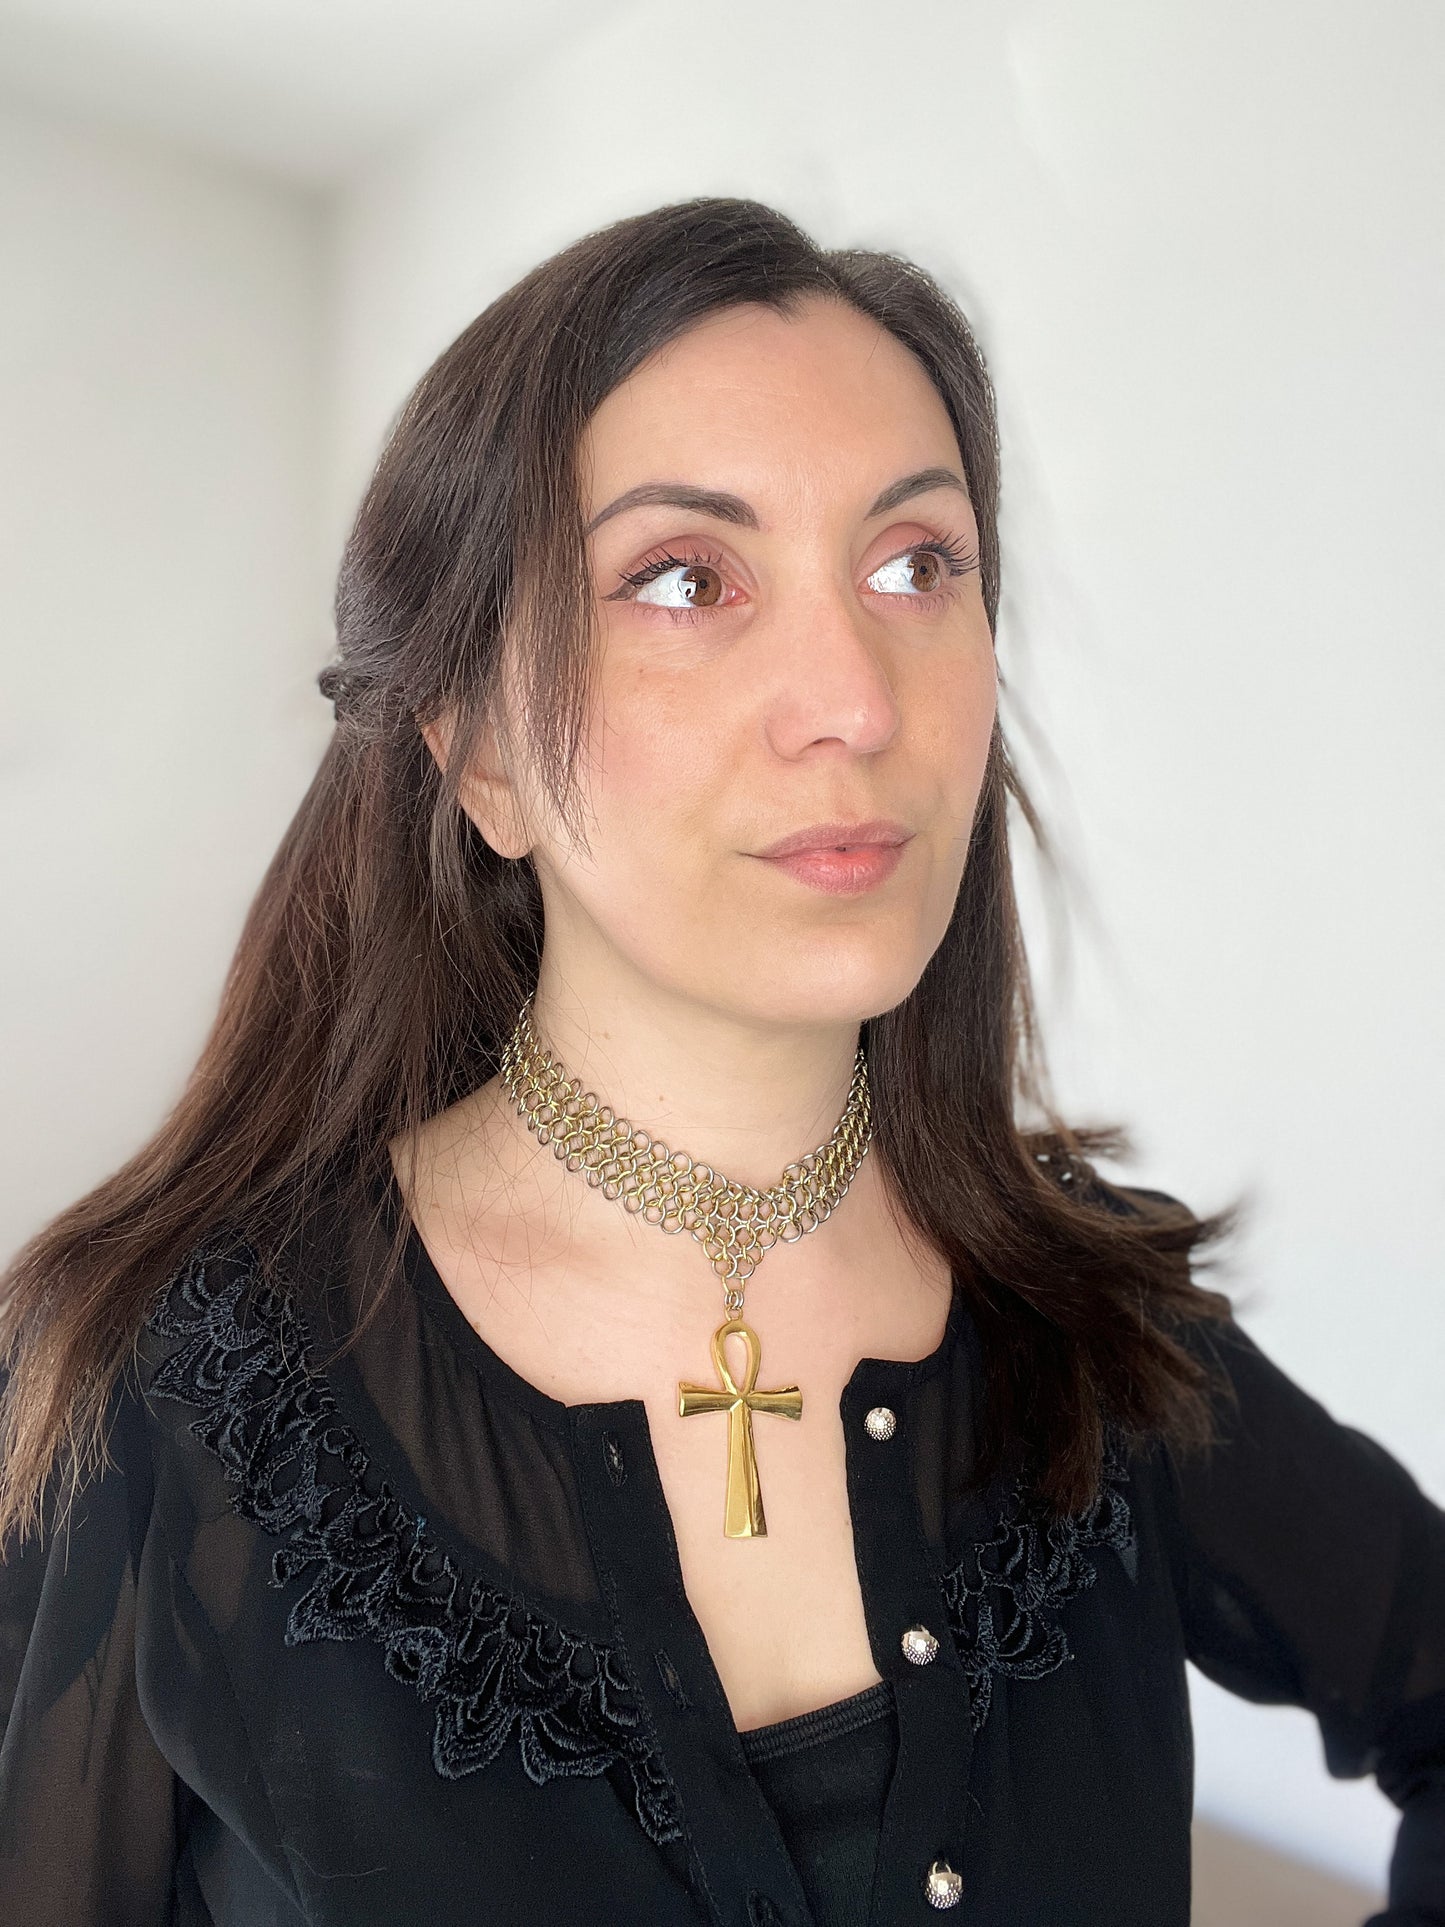 Ankh chainmail choker made of stainless steel and 18k gold plated European 4 in 1 necklace with a big Egyptian cross gothic jewelry